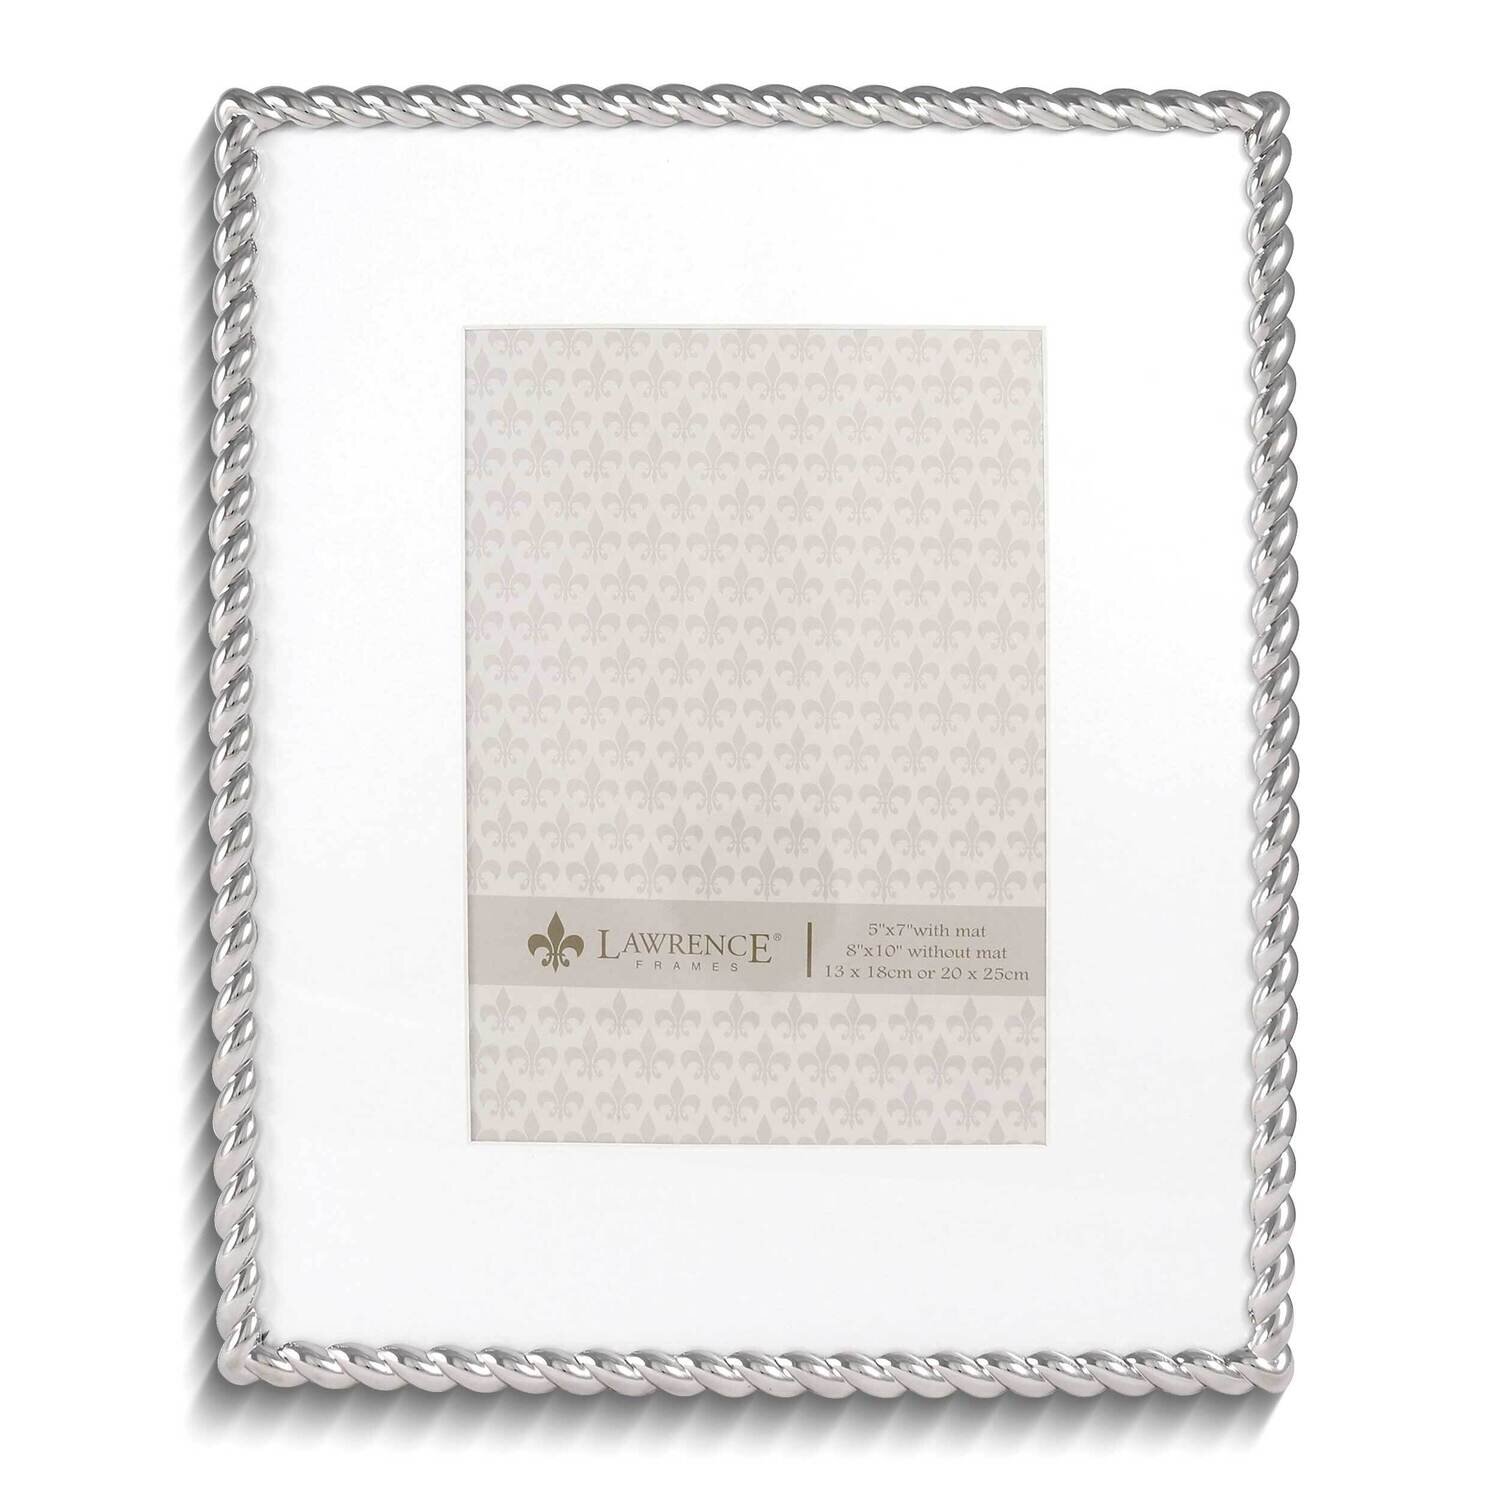 Silver-tone Rope 8 x 10 Inch Photo Picture Frame Matted for 5x7 Photo GM9903